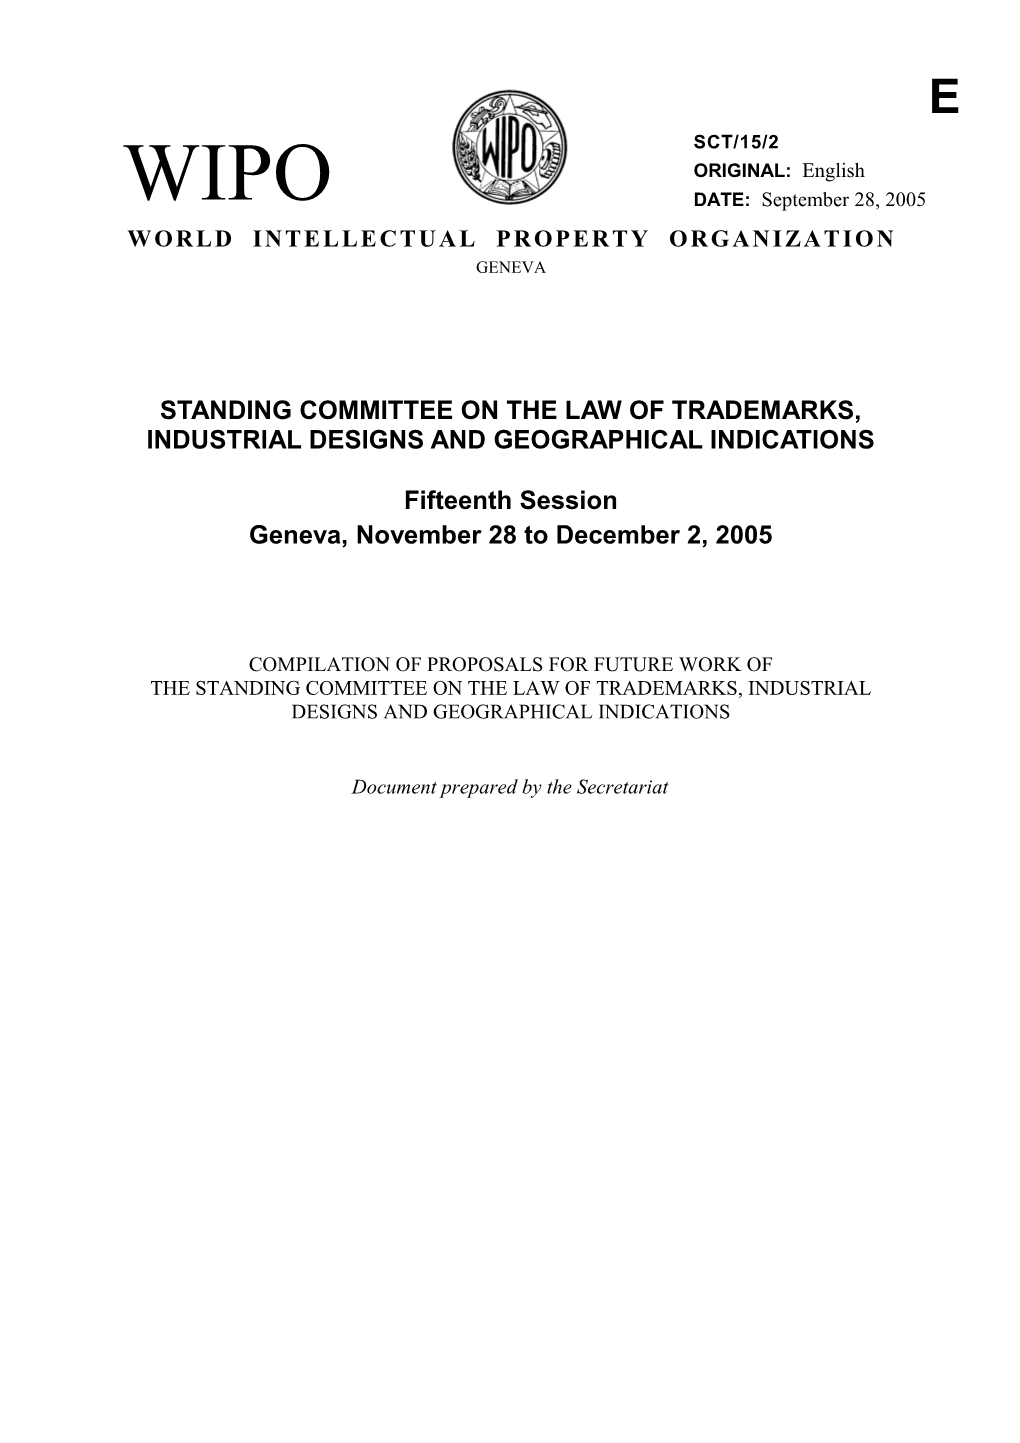 SCT/15/2: Compilation of Proposals for Future Work of the Standing Committee on the Law